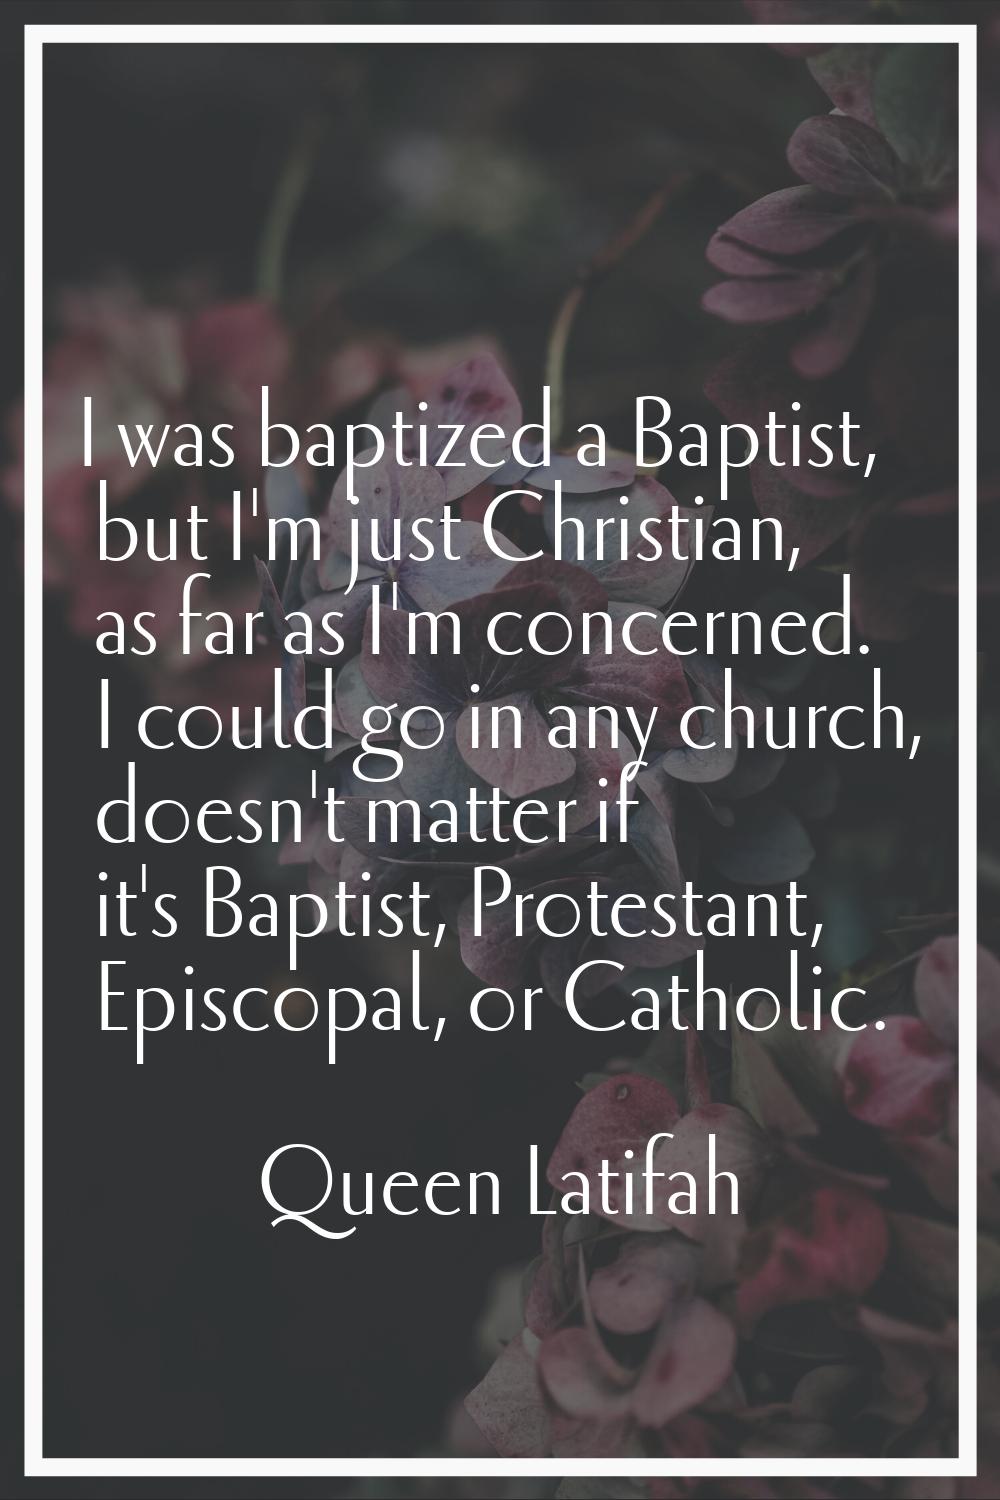 I was baptized a Baptist, but I'm just Christian, as far as I'm concerned. I could go in any church